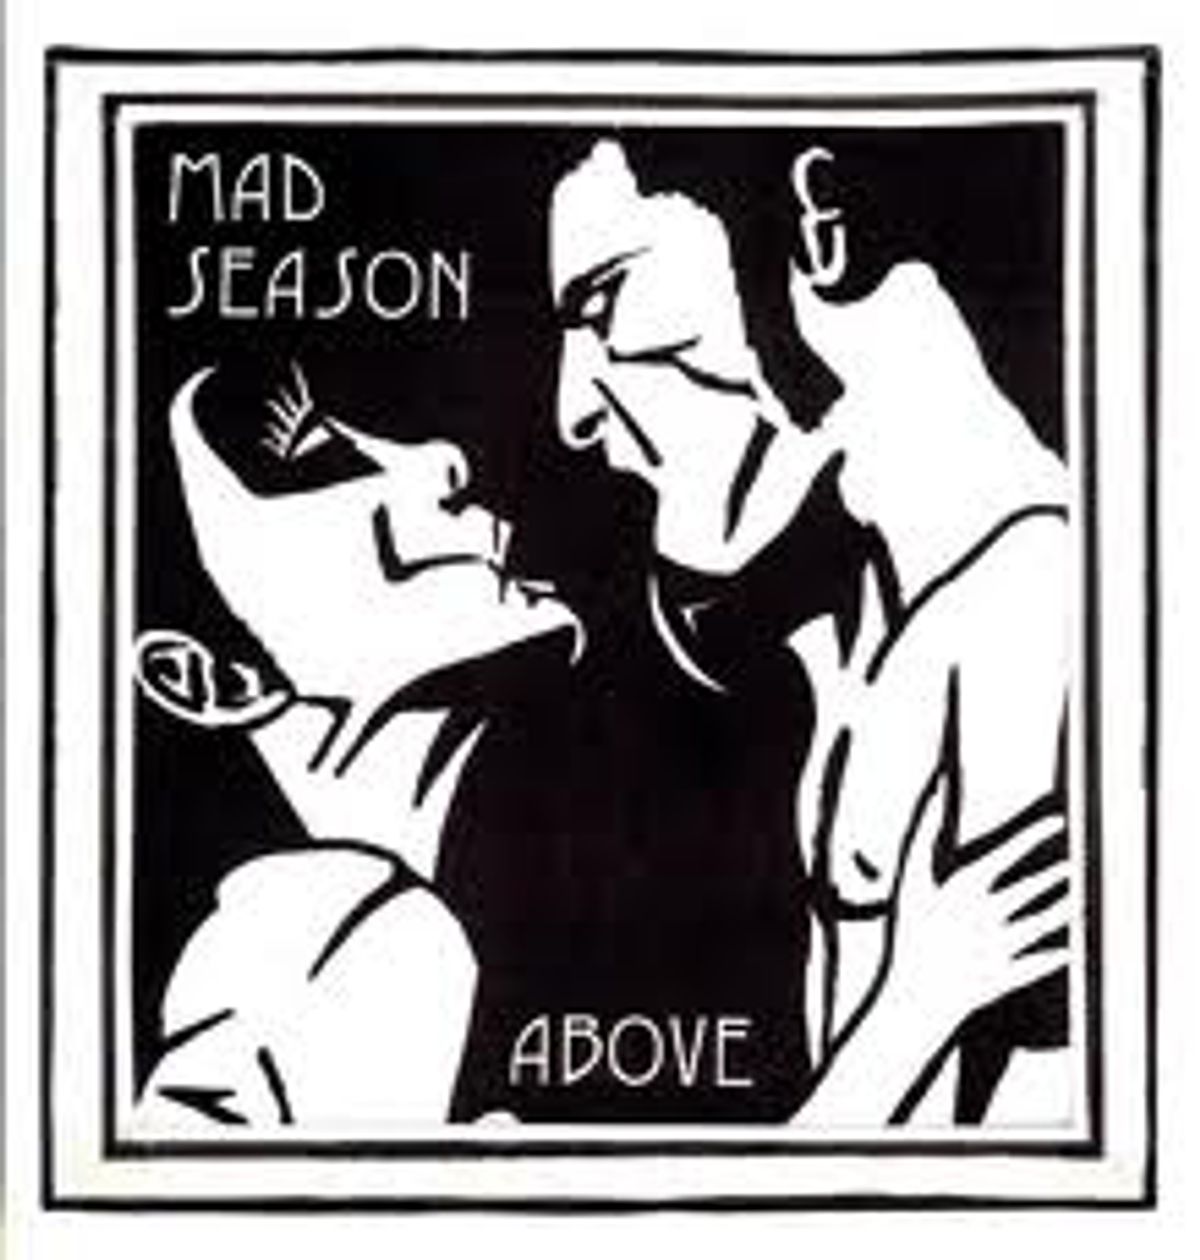 Mad Season - Above (deluxe edition)